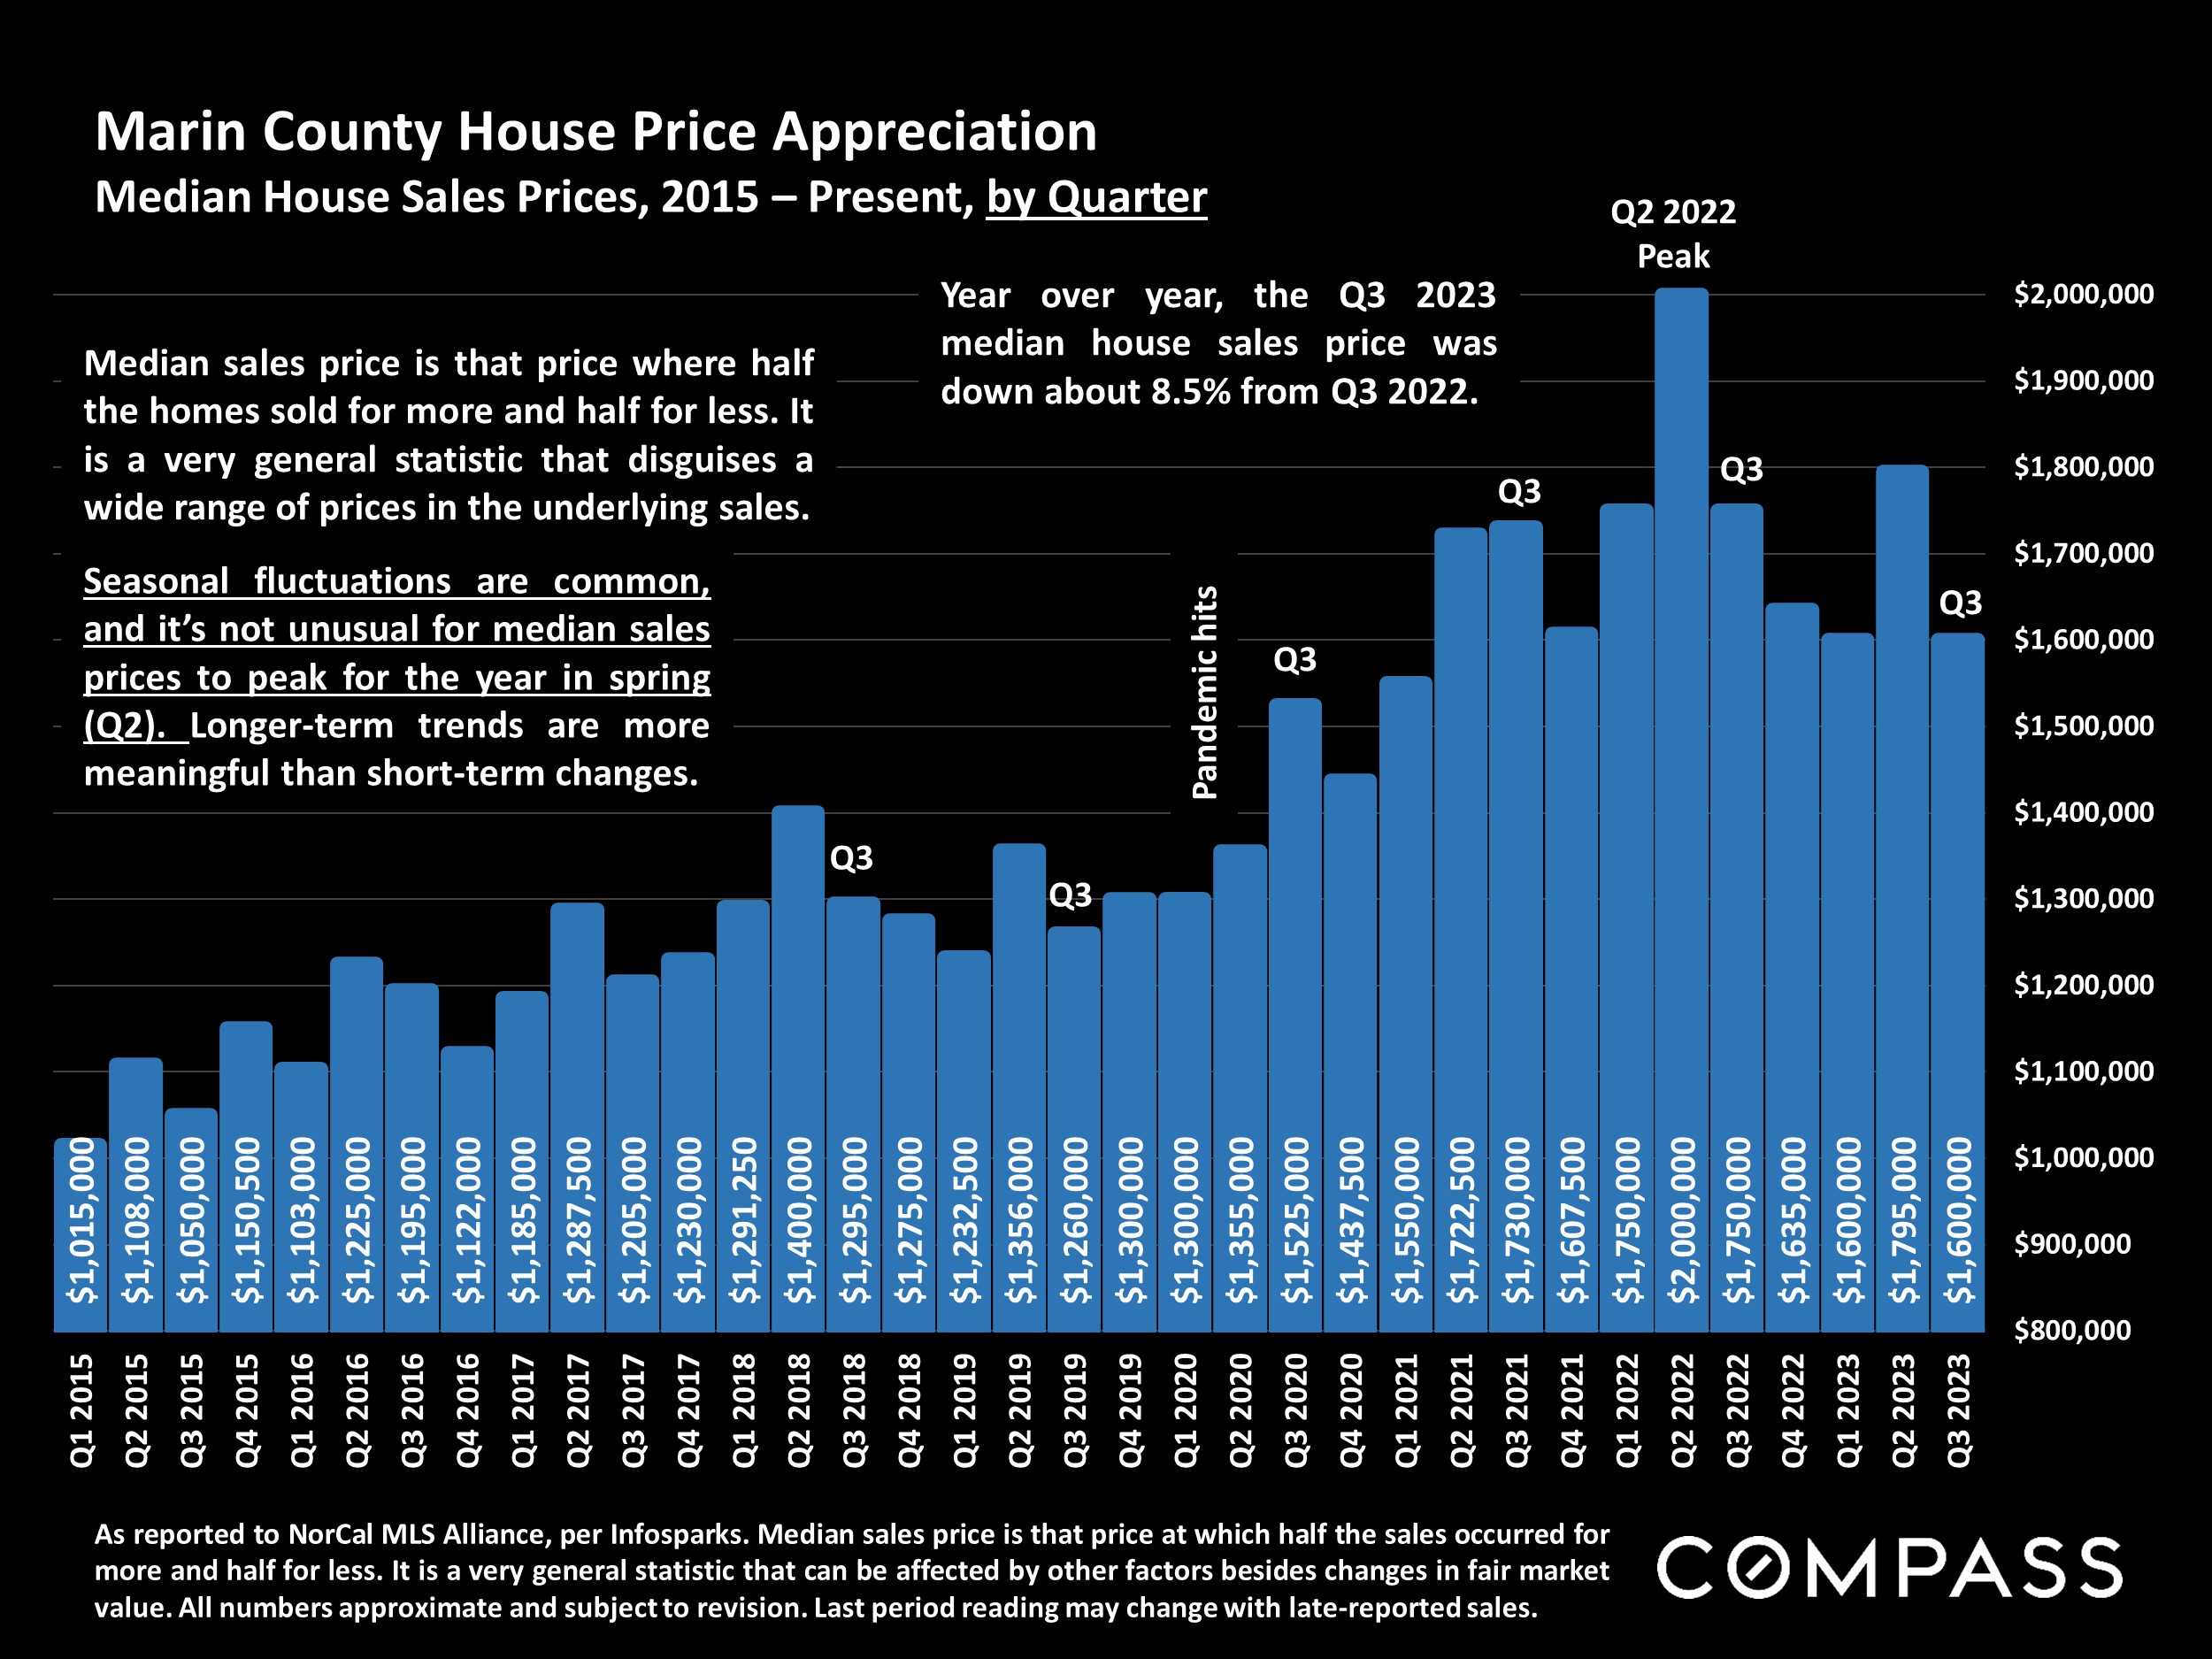 Marin County House Price Appreciation Median House Sales Prices, 2015 - Present, by Quarter